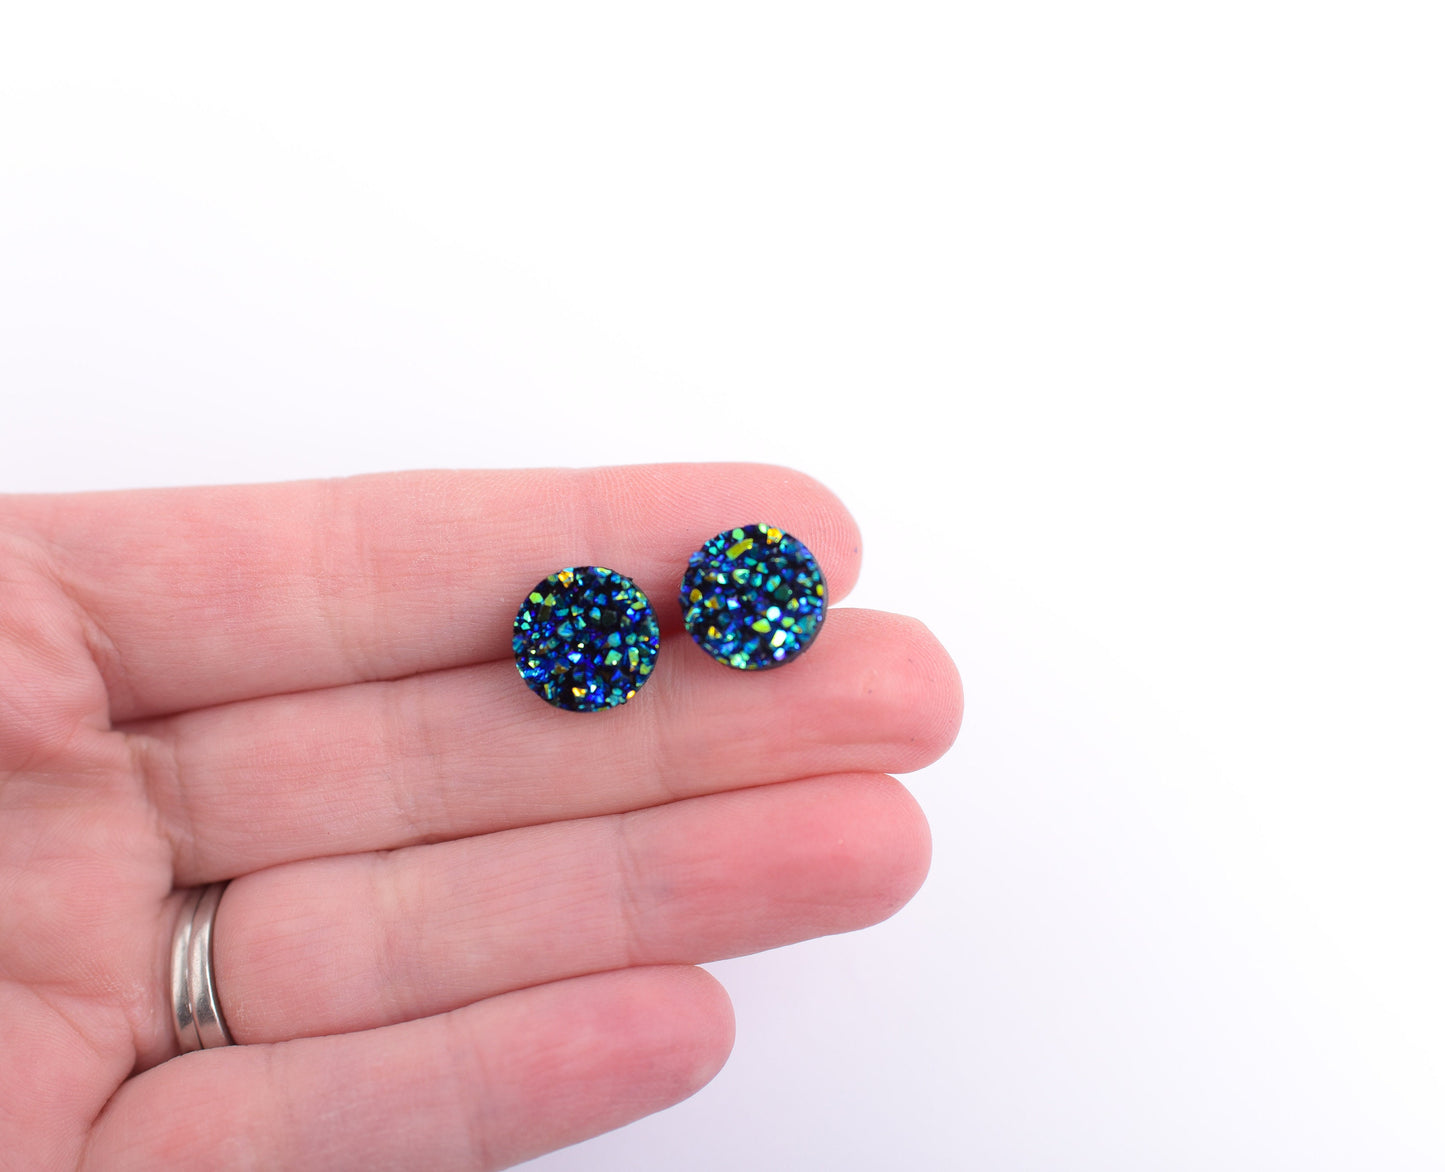 Faux Druzy 12mm Peacock Earrings with Titanium Posts